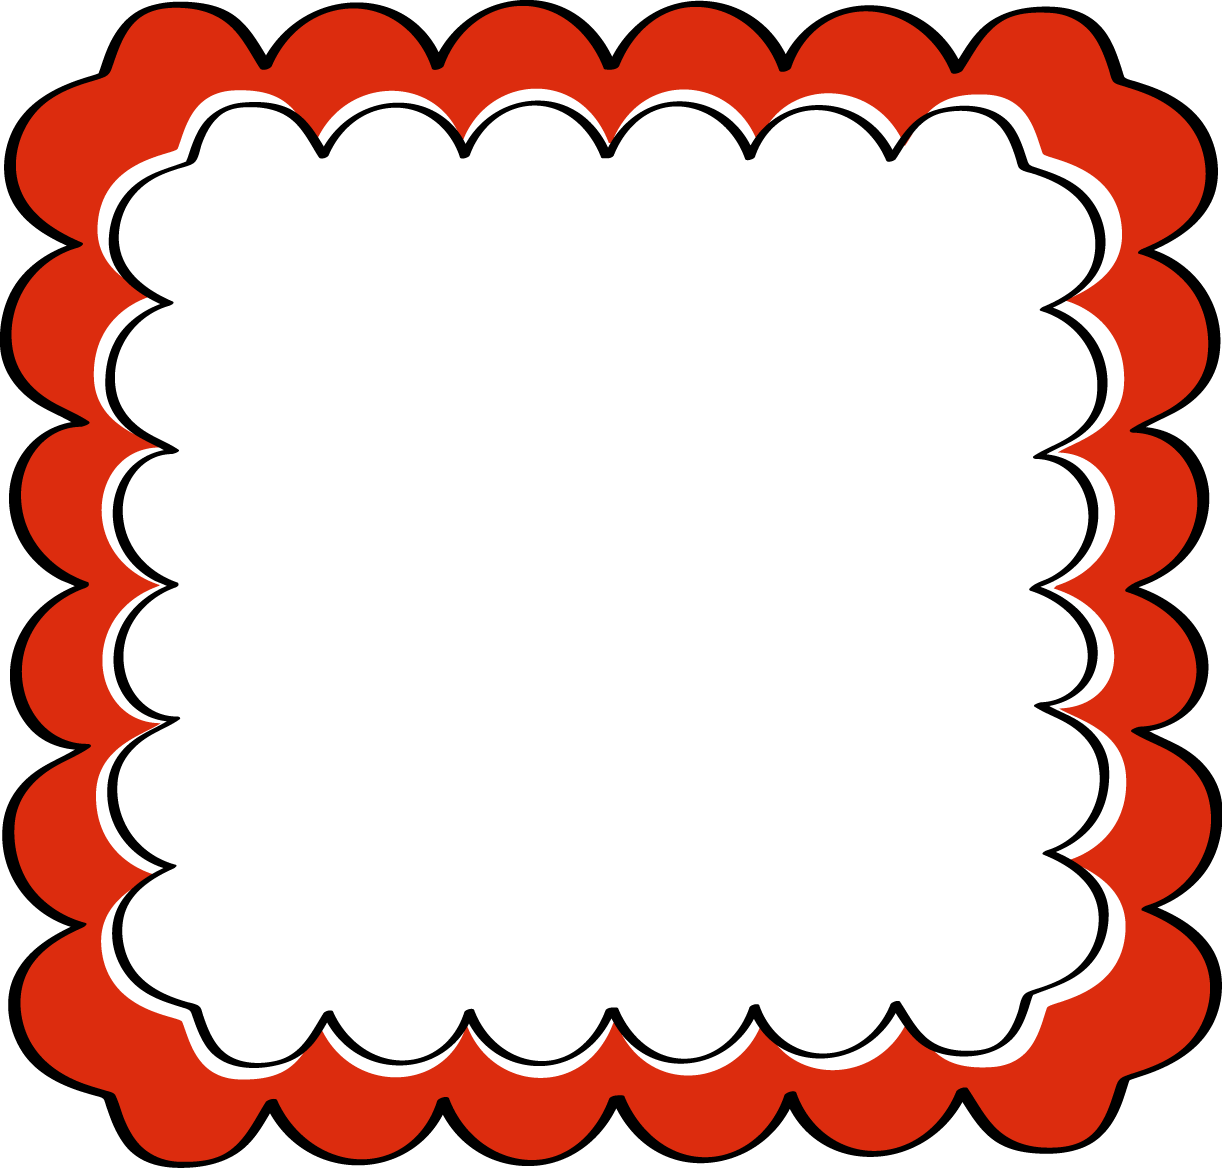 Clipart border scrapbook. Frames and borders red